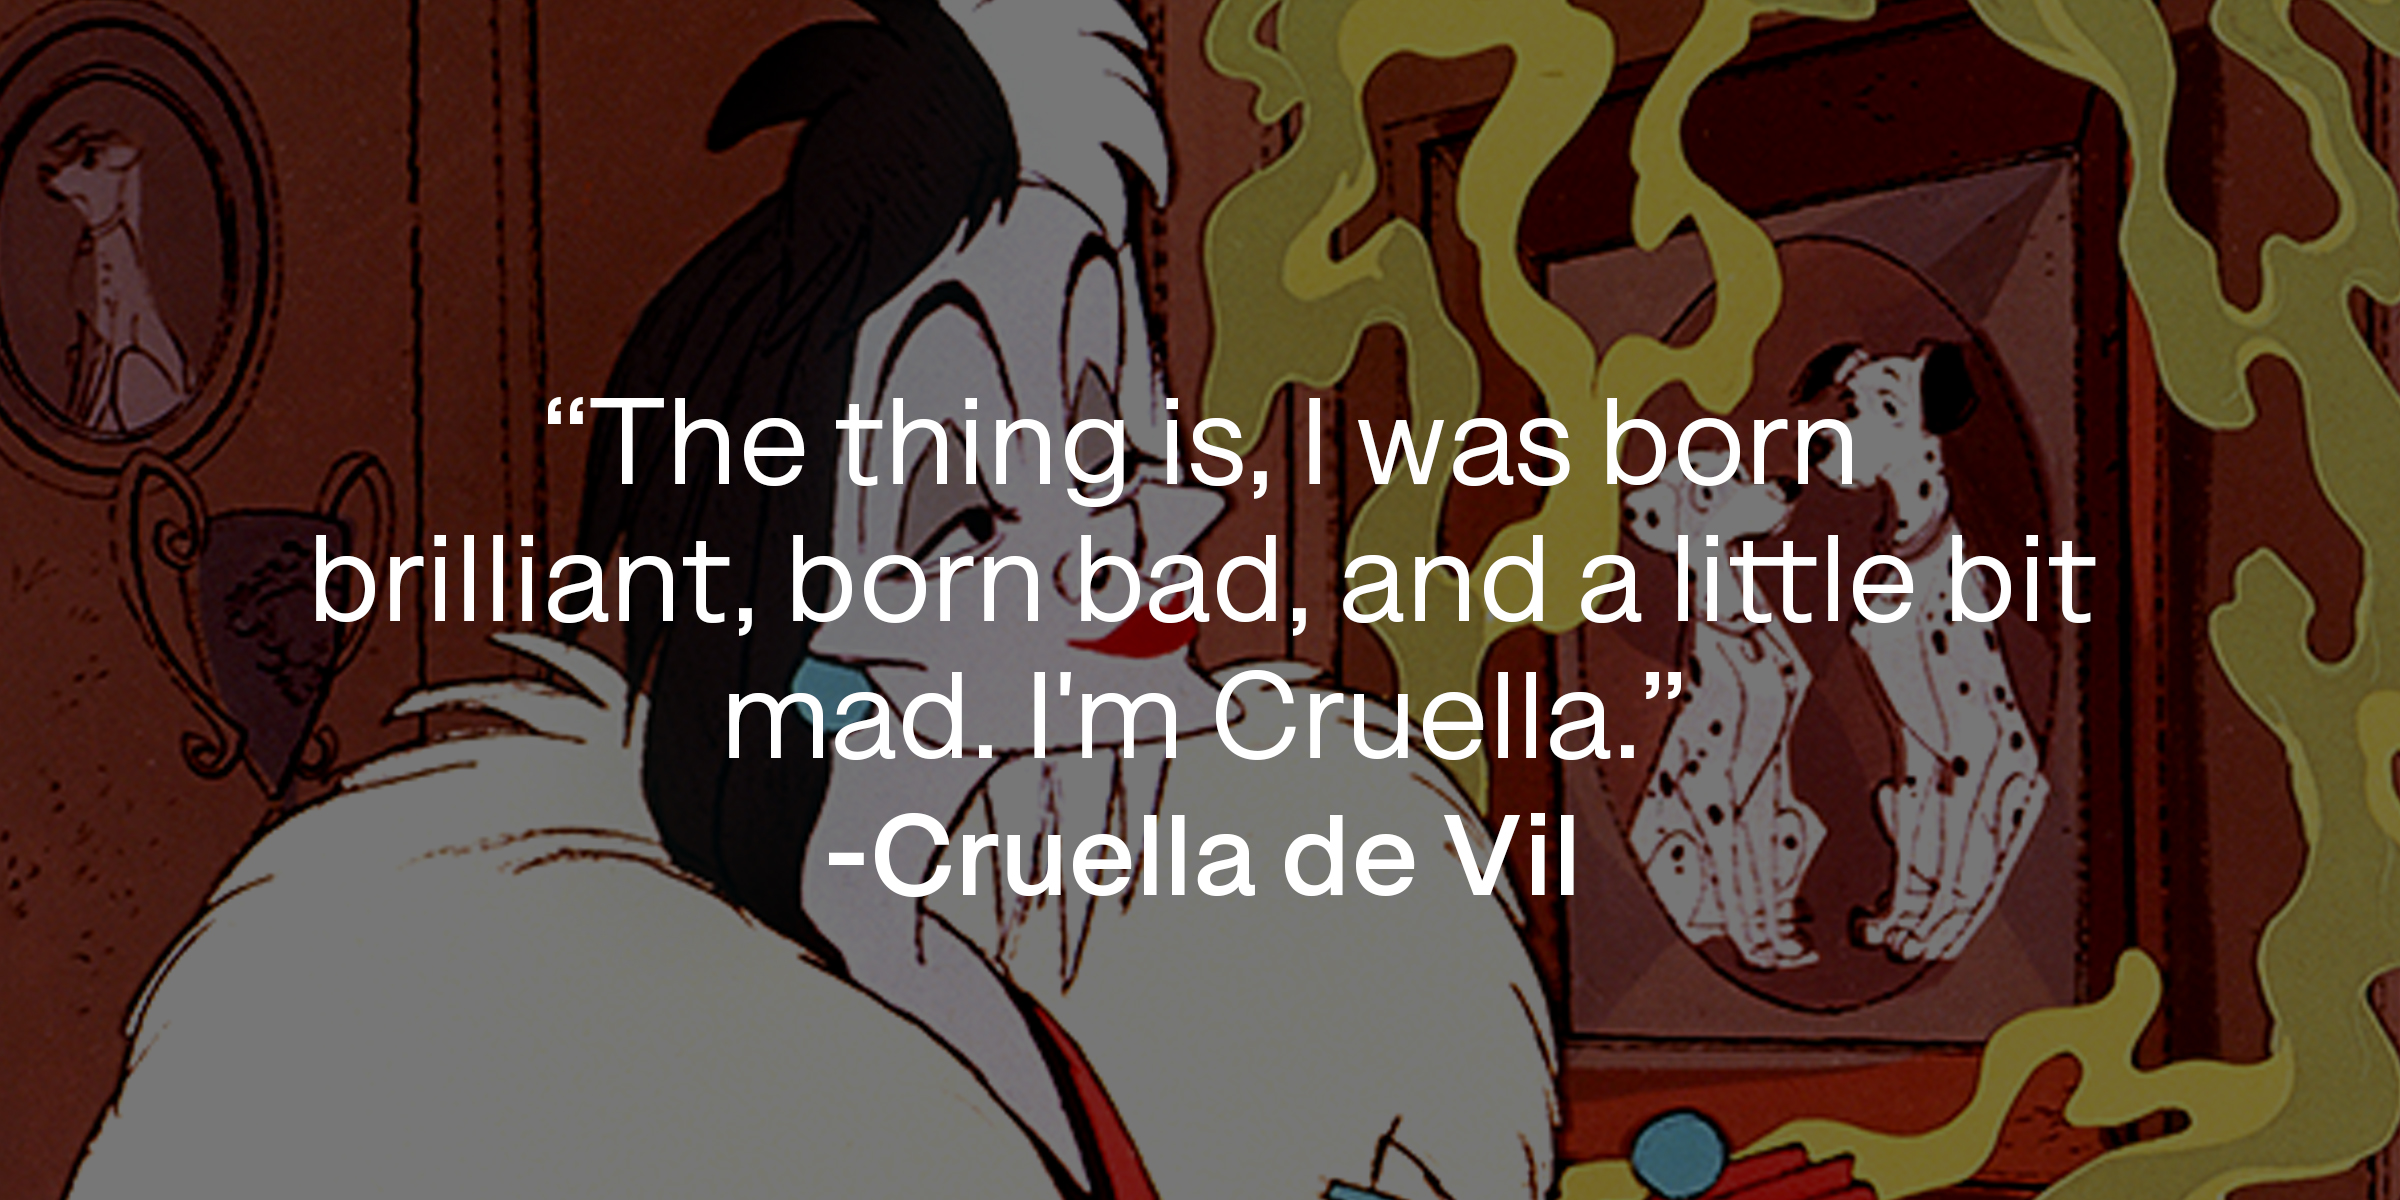 An image of the animated Cruella de Vil, with a quote from the same adapted character in the 2021 film “Cruella”: “The thing is, I was born brilliant, born bad, and a little bit mad. I'm Cruella.” | Source: Facebook.com/DisneyCruellaDeVil